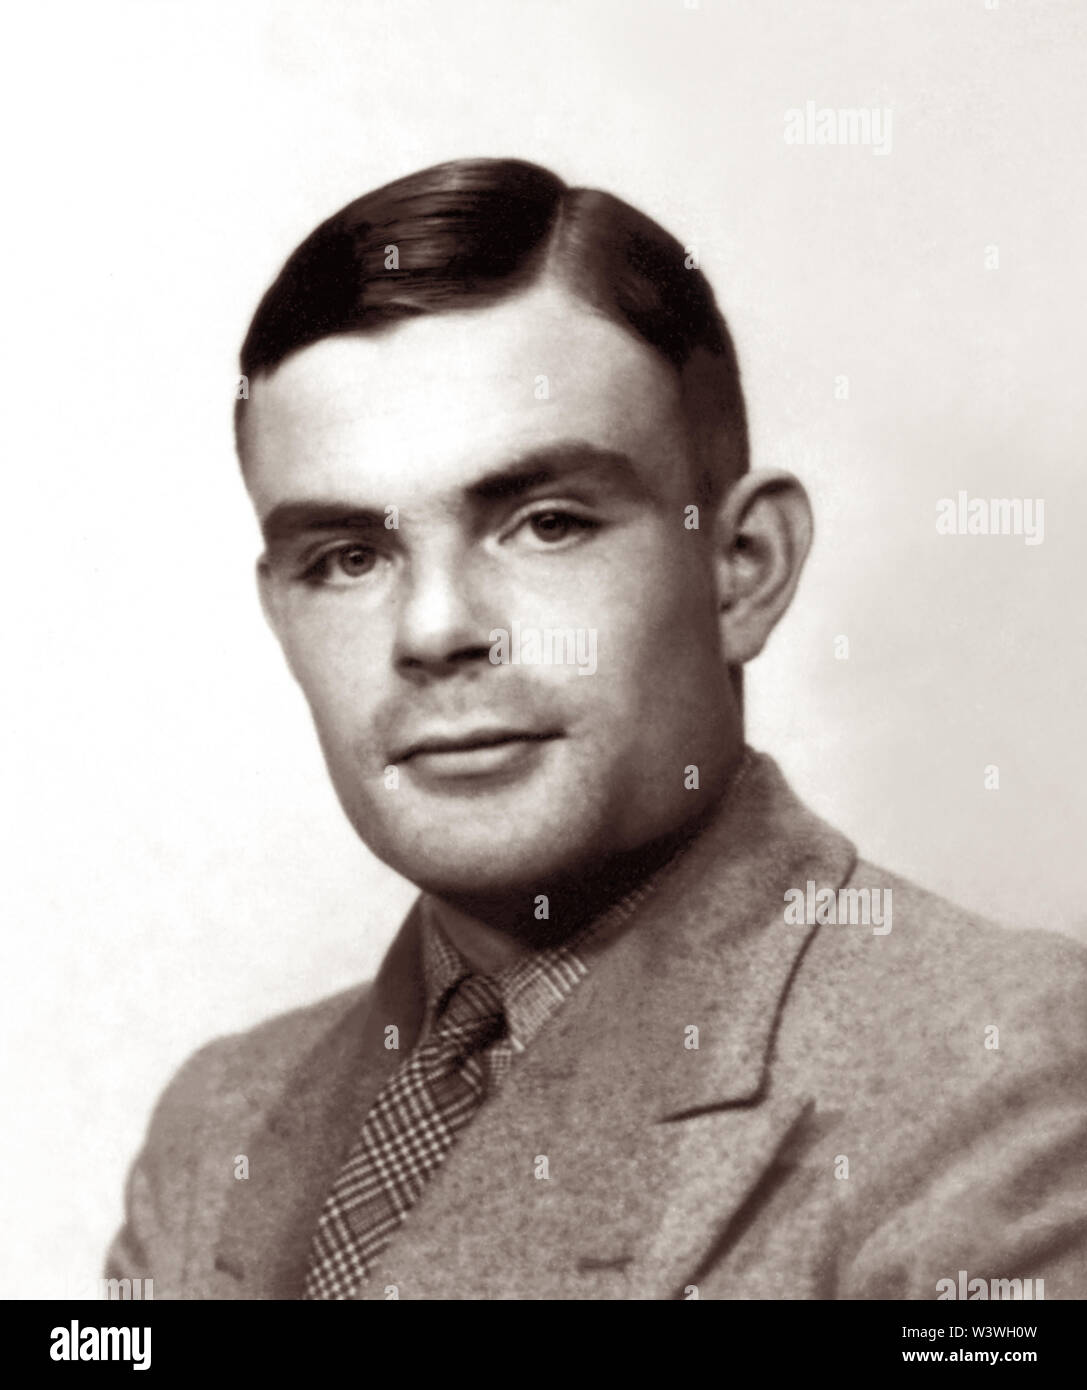 Alan Mathison Turing (1912-1954), a British mathematician, is widely considered to be the father of theoretical computer science and artificial intelligence. During World War II he worked for the Government Code and Cypher School at Bletchley Park, Britain's codebreaking center that produced Ultra intelligence. For a while Turing led Hut 8, the section responsible for German naval cryptanalysis. Turing played a pivotal role in cracking intercepted coded messages that helped enable the Allies to defeat the Nazis. (Photo circa 1930s) Stock Photo